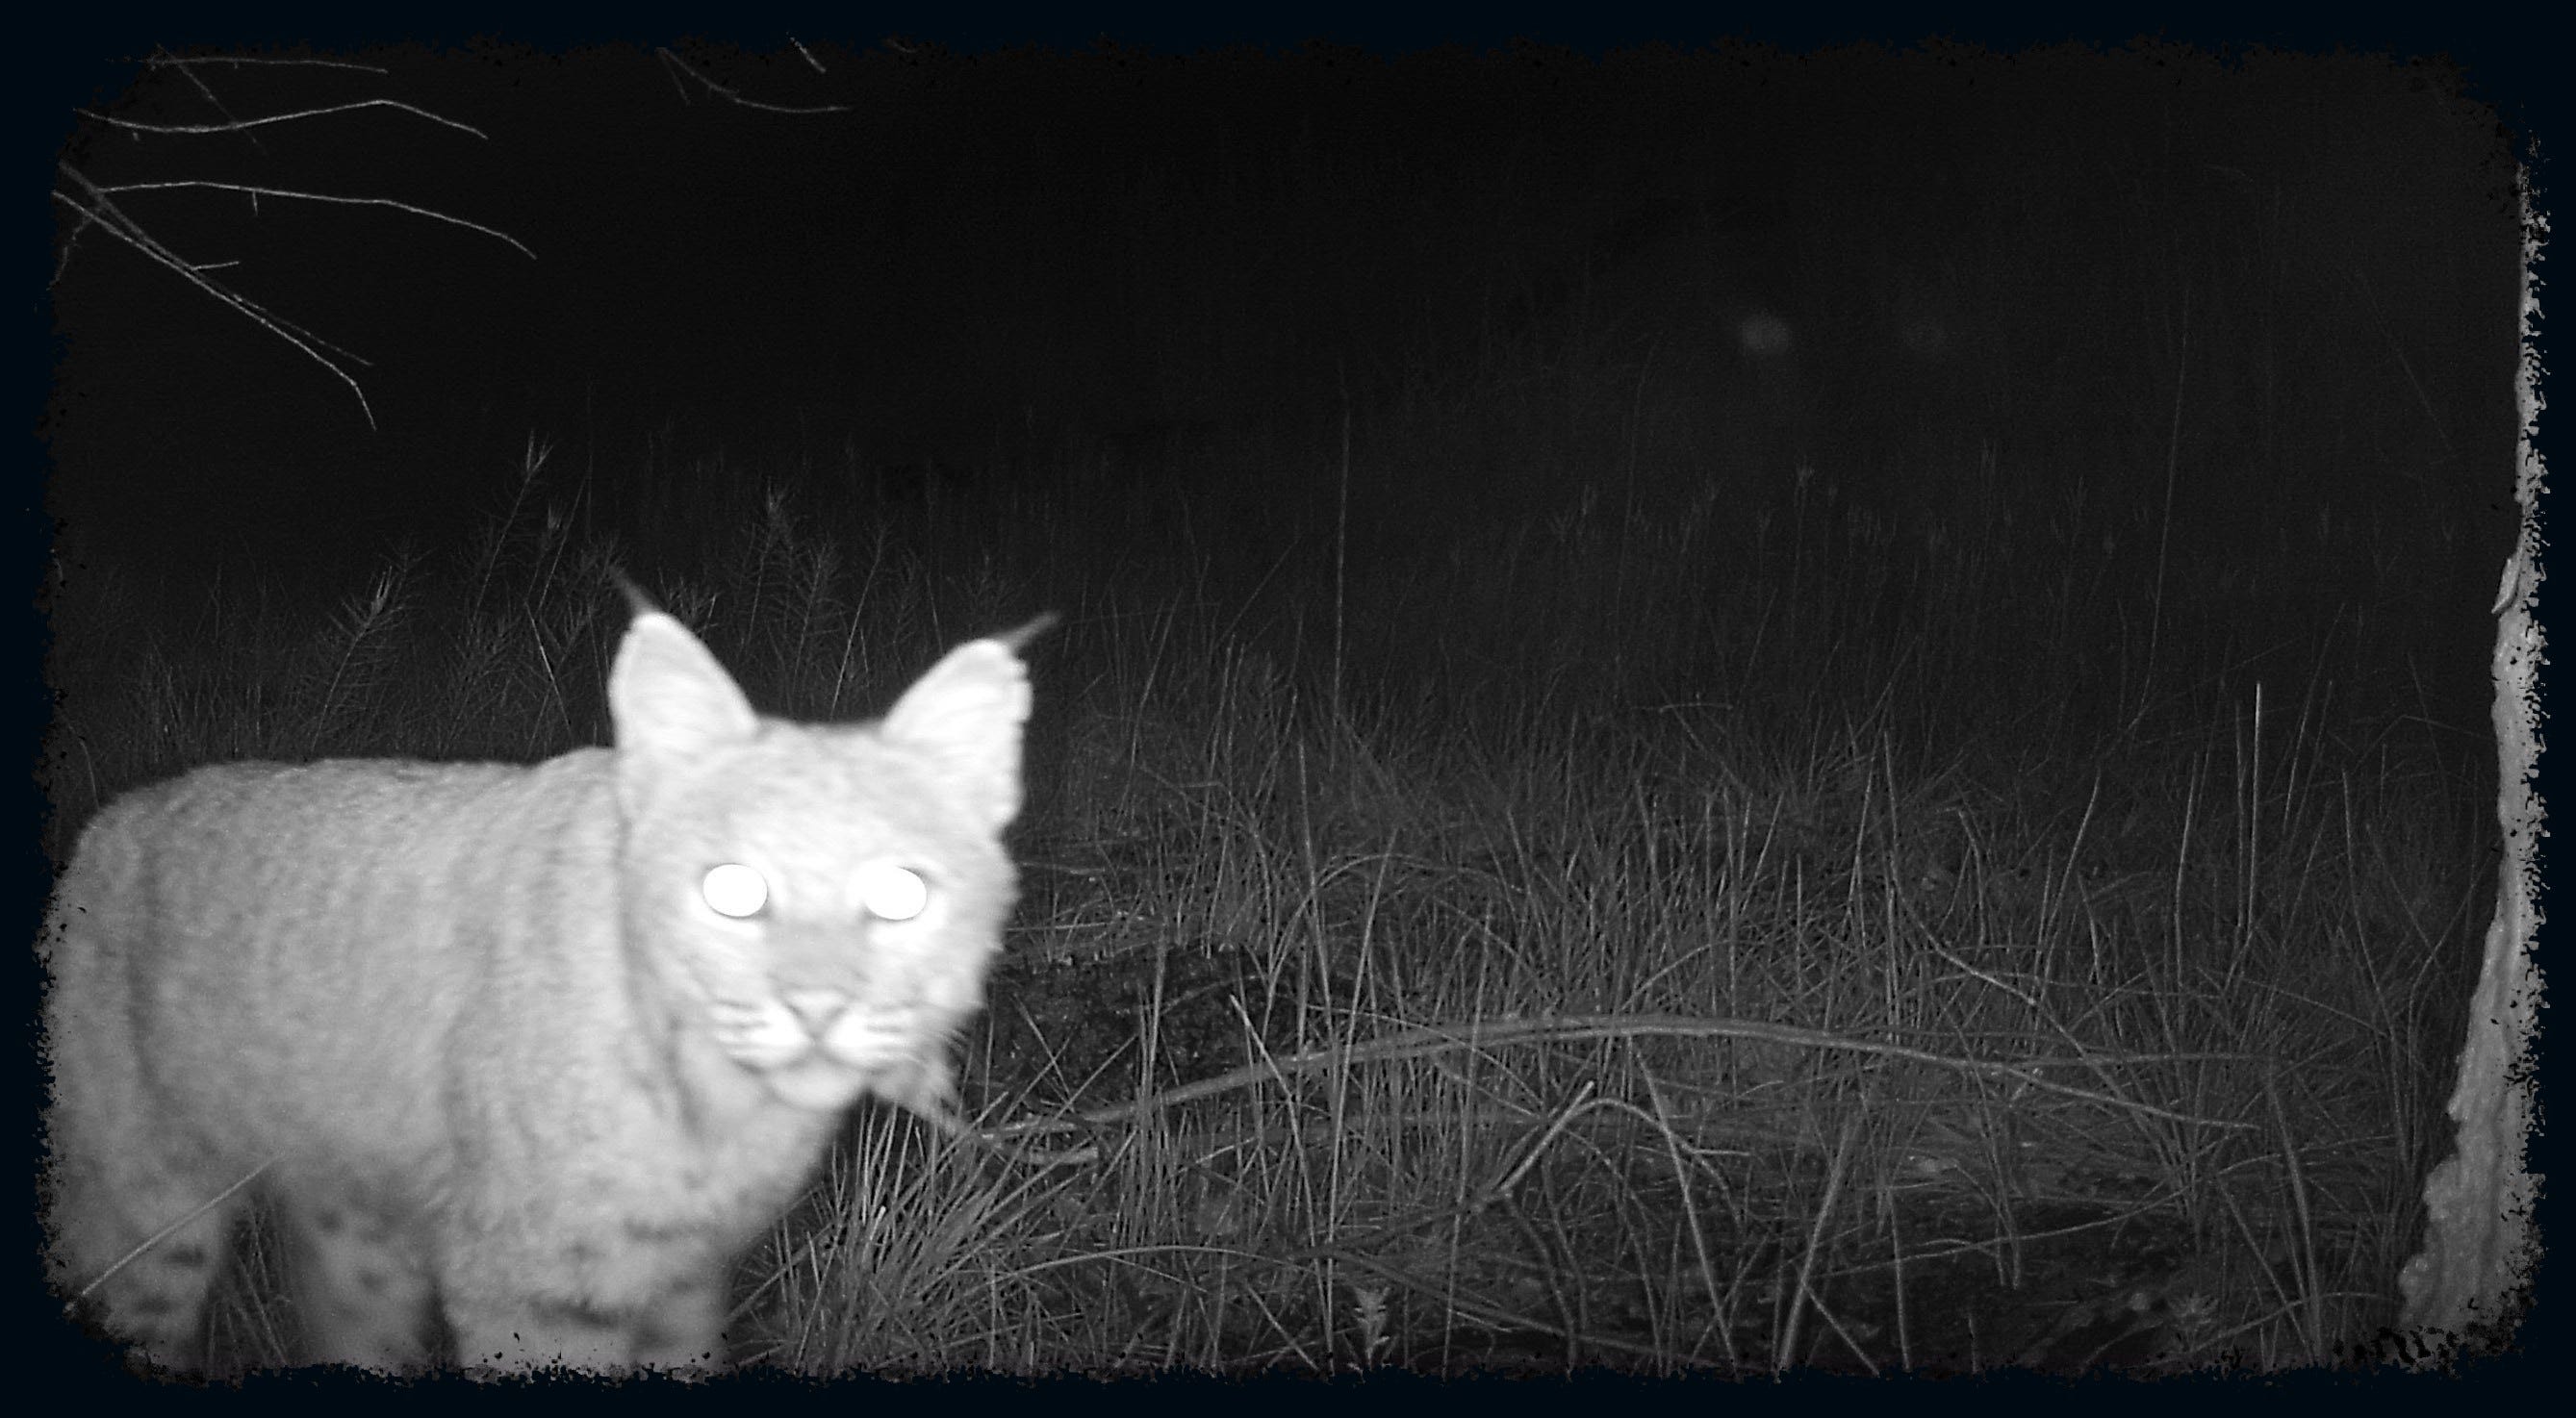 Cameras capture images of over 100 species along US-Mexico border